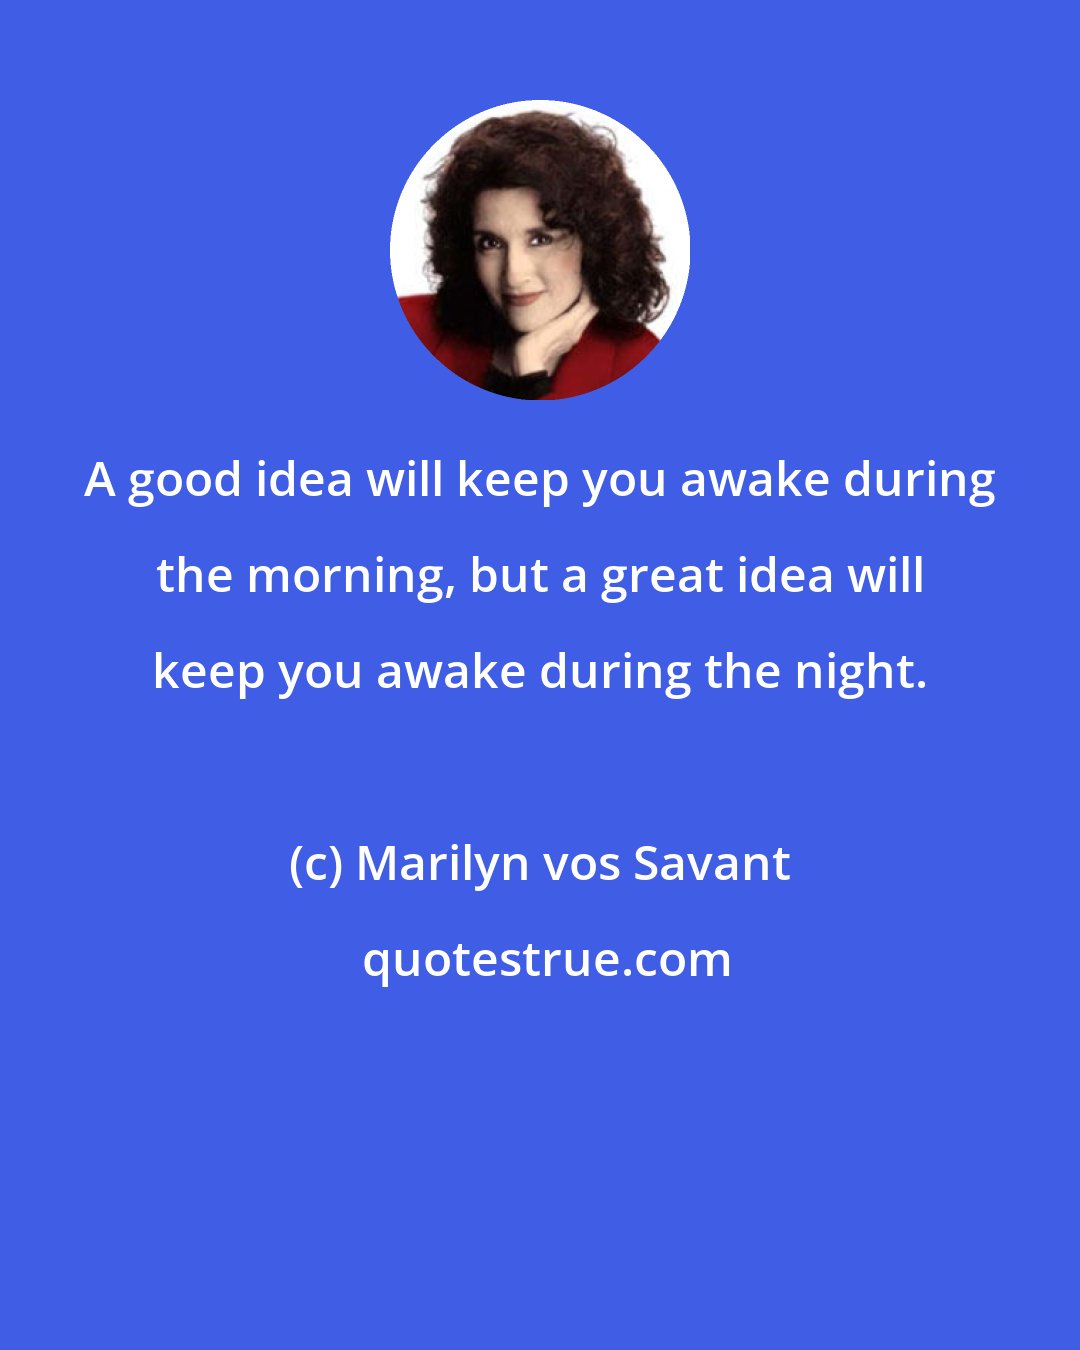 Marilyn vos Savant: A good idea will keep you awake during the morning, but a great idea will keep you awake during the night.